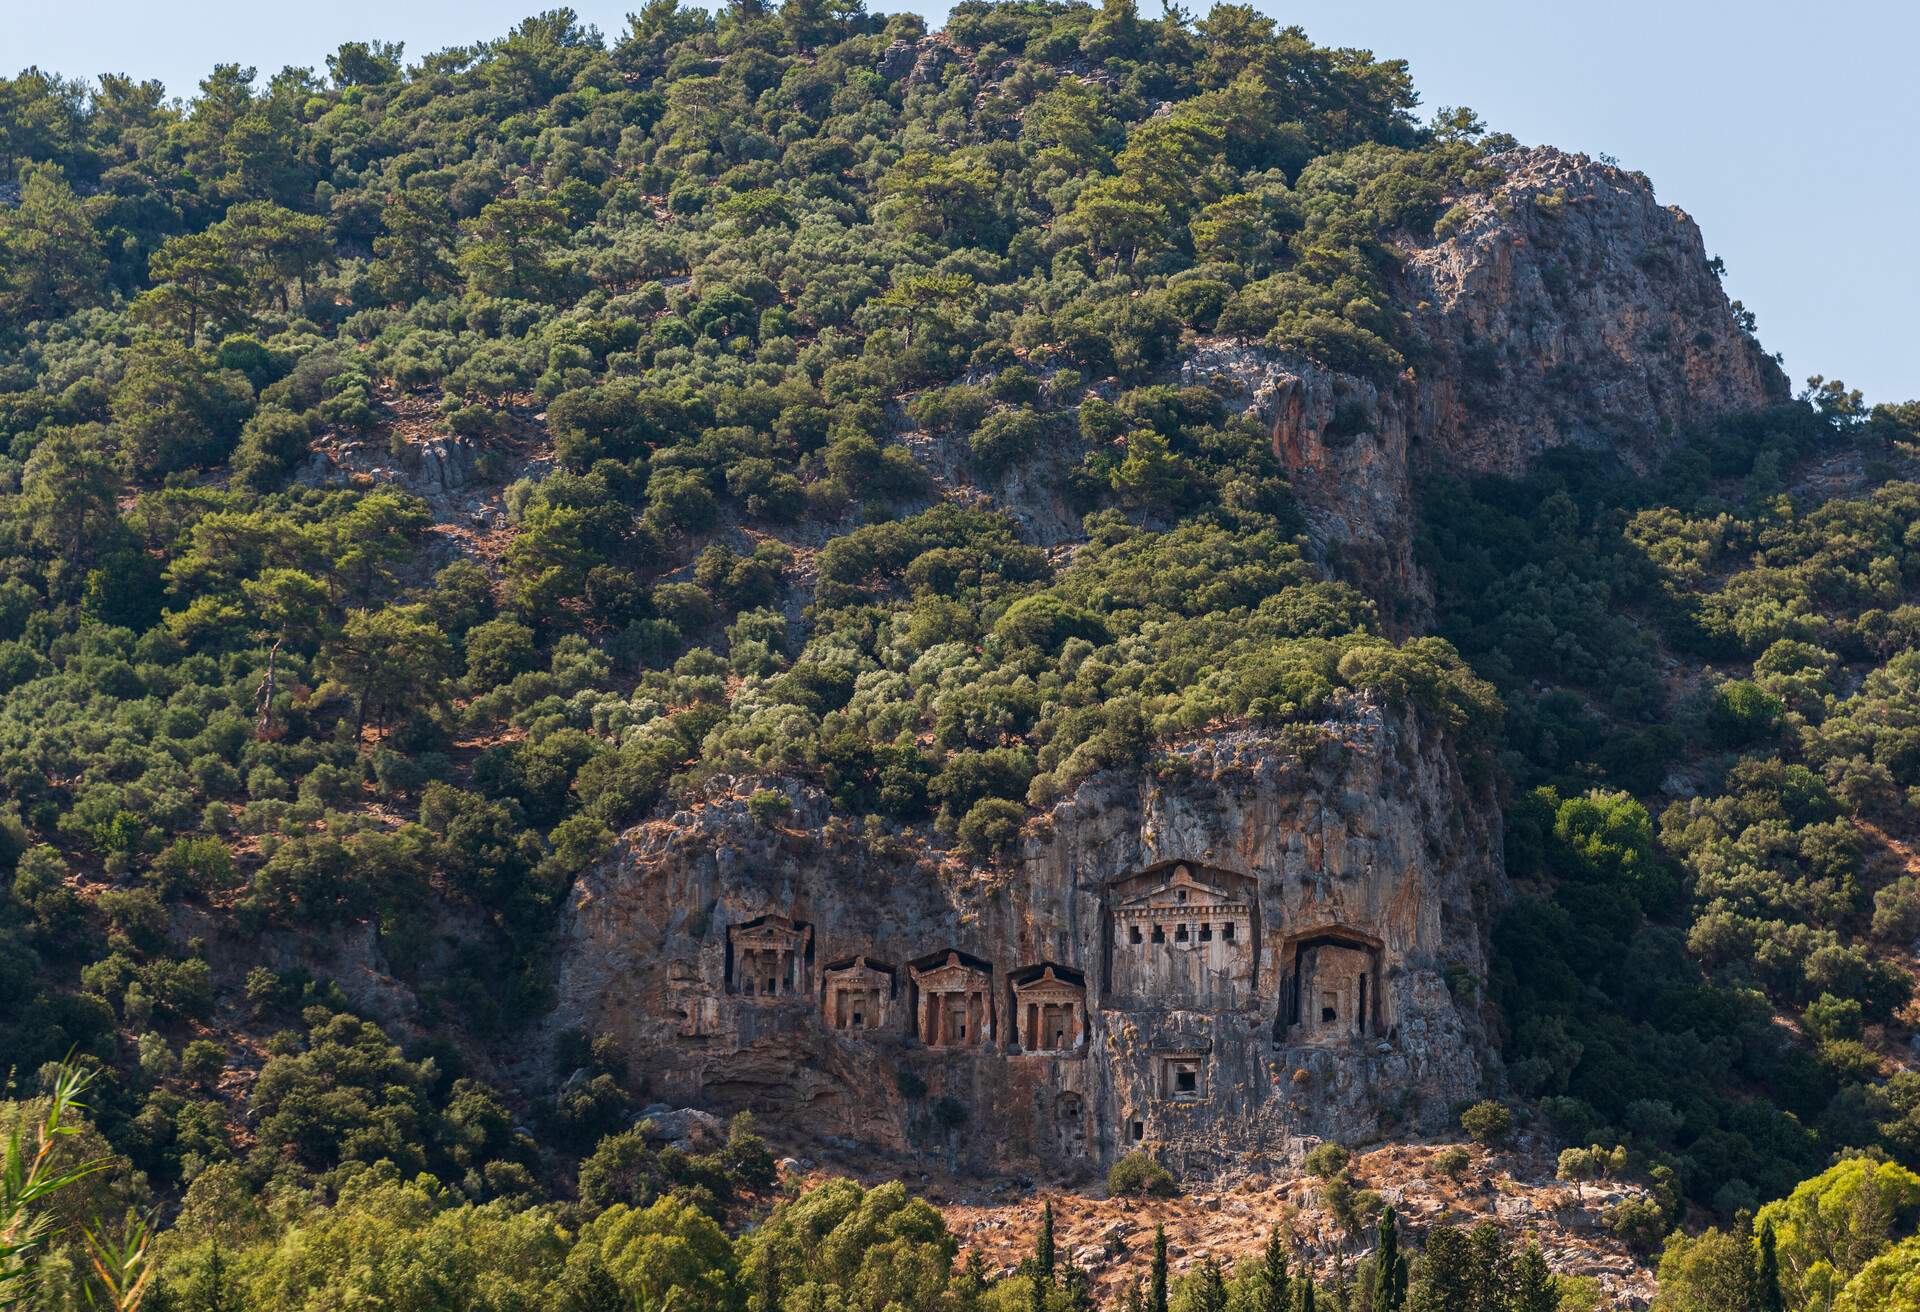 Historical rock tombs from Dalyan Stream with their unique beauty, which contain Caretta carettas, located in the province of Muğla, Turkey.